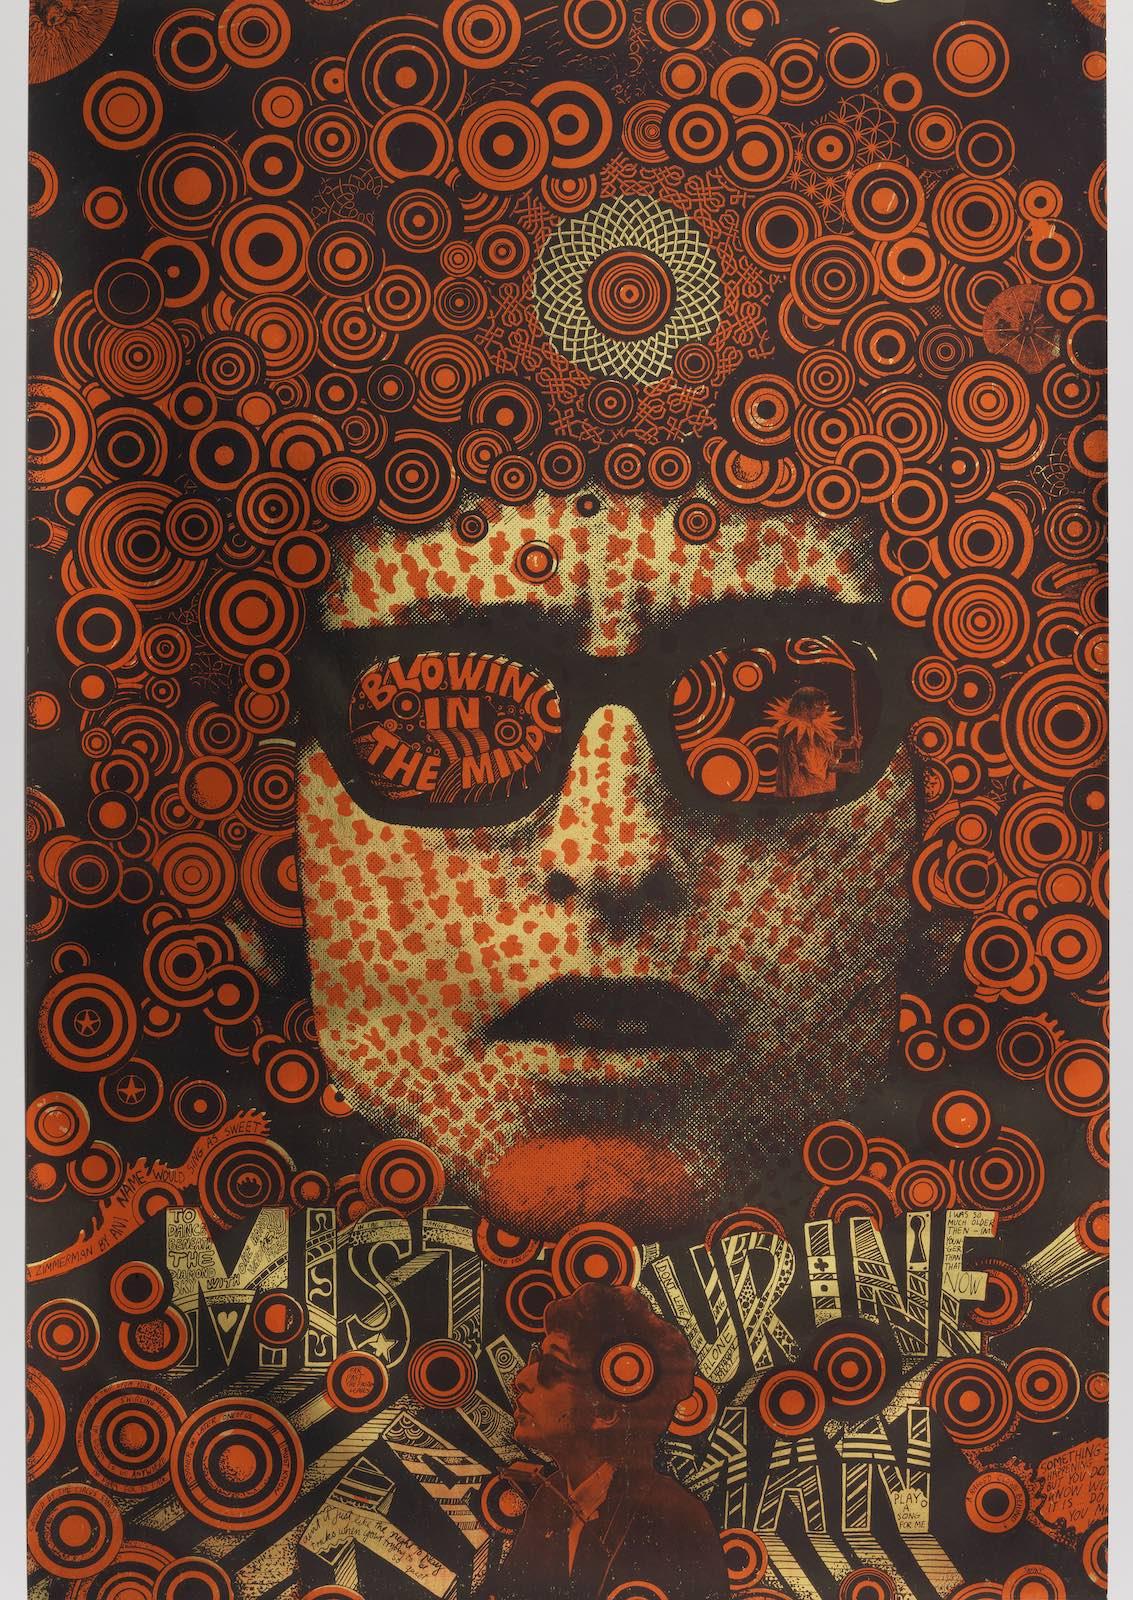 Martin Sharp, Blowing in the Mind/Mister Tambourine Man, 1968.